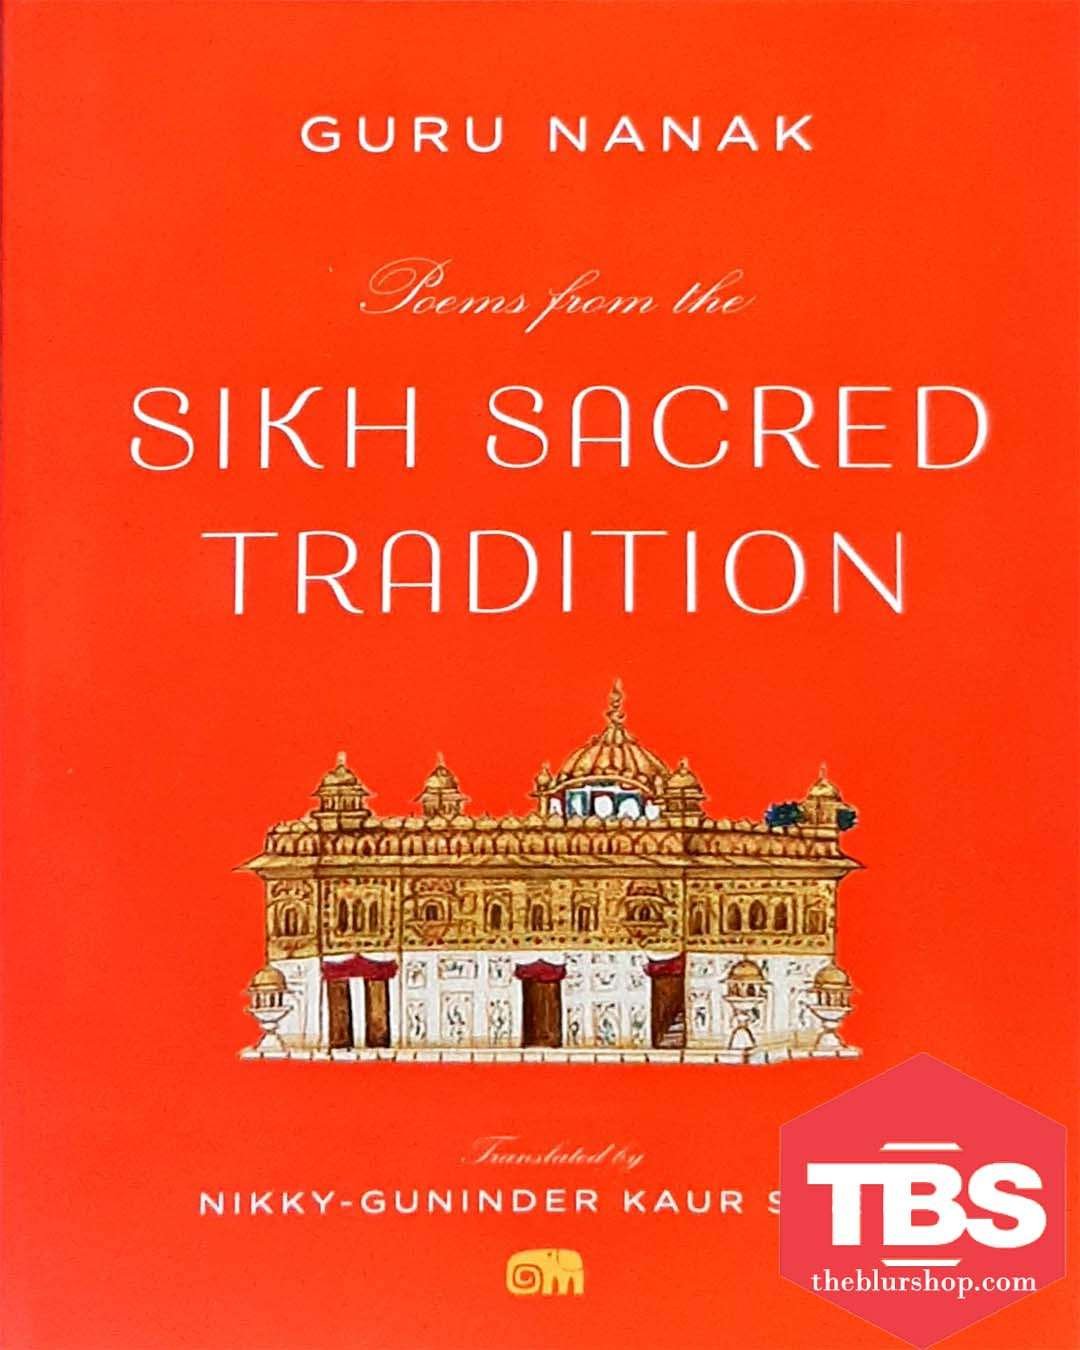 Poems From The Sikh Sacred Tradition